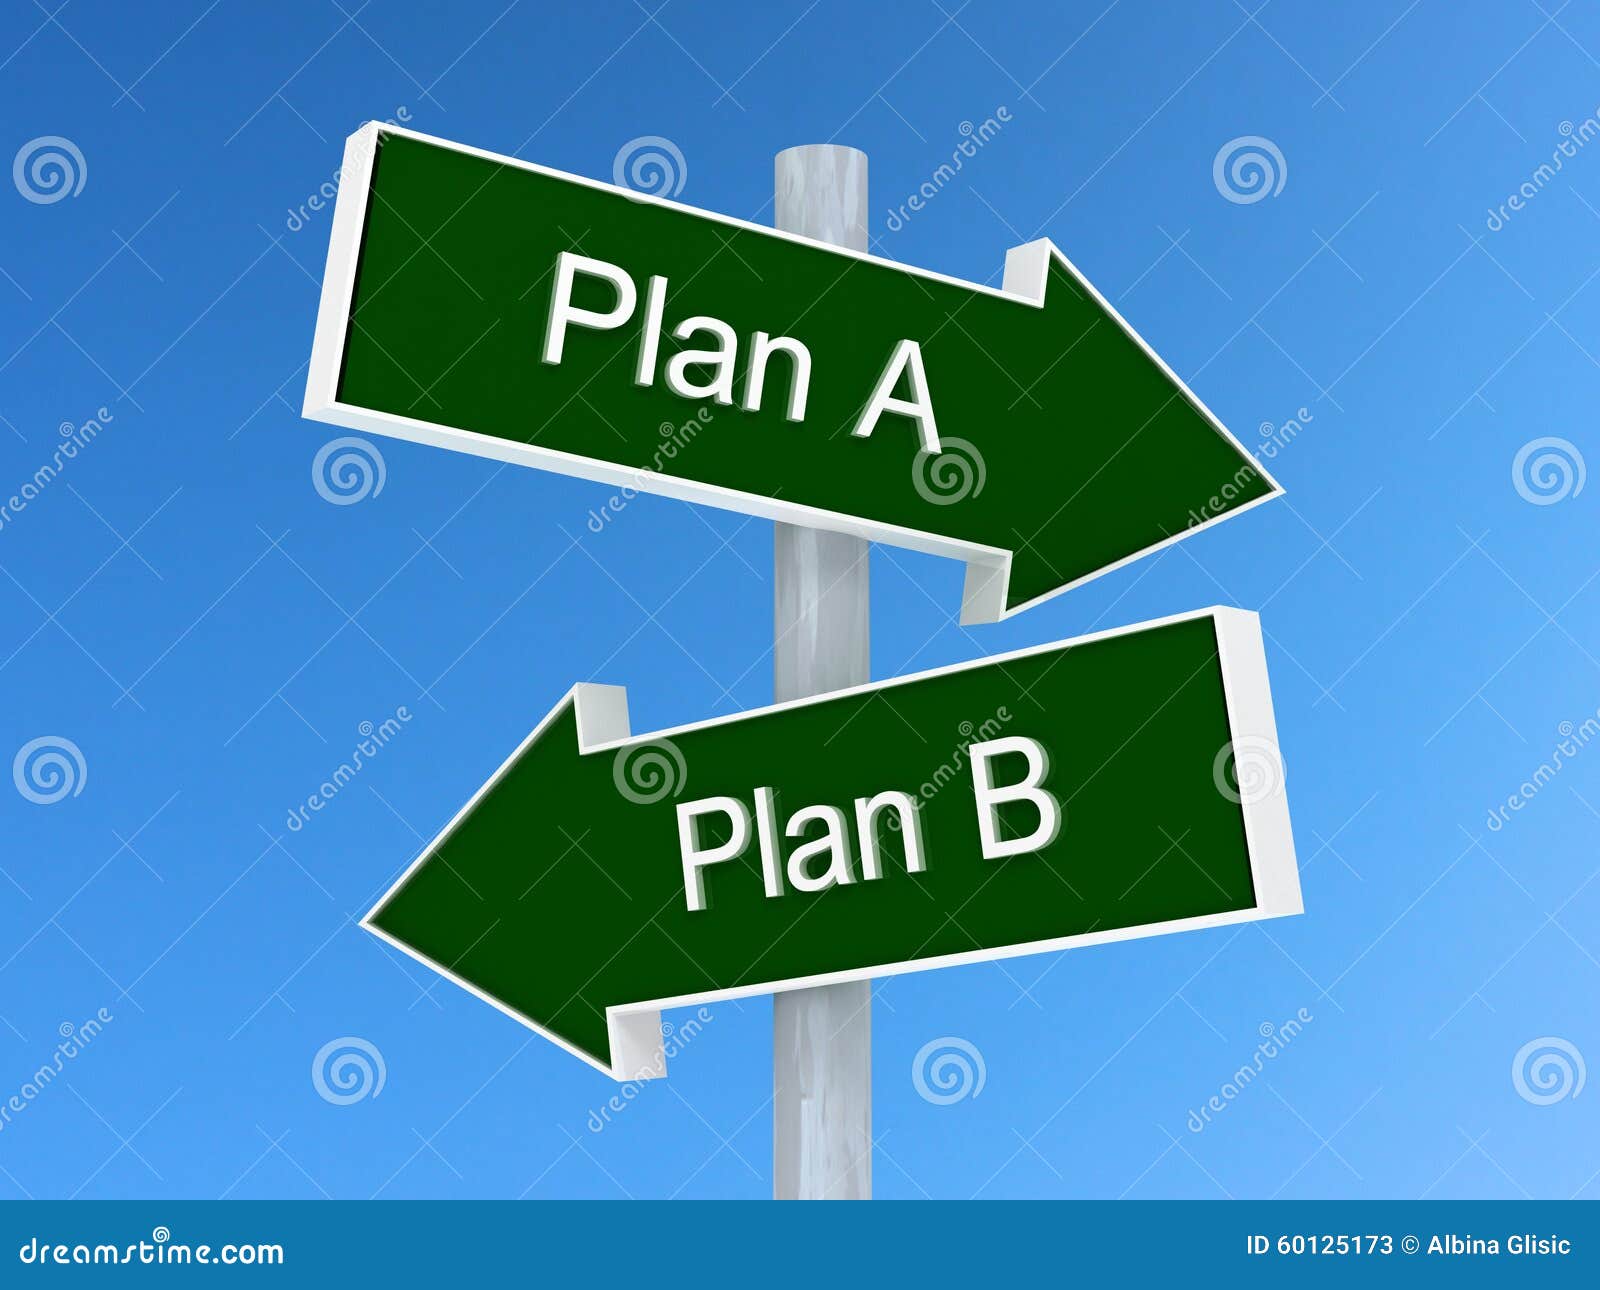 Plan A Vs Plan B Sign. First Or Second Choice Concept Stock